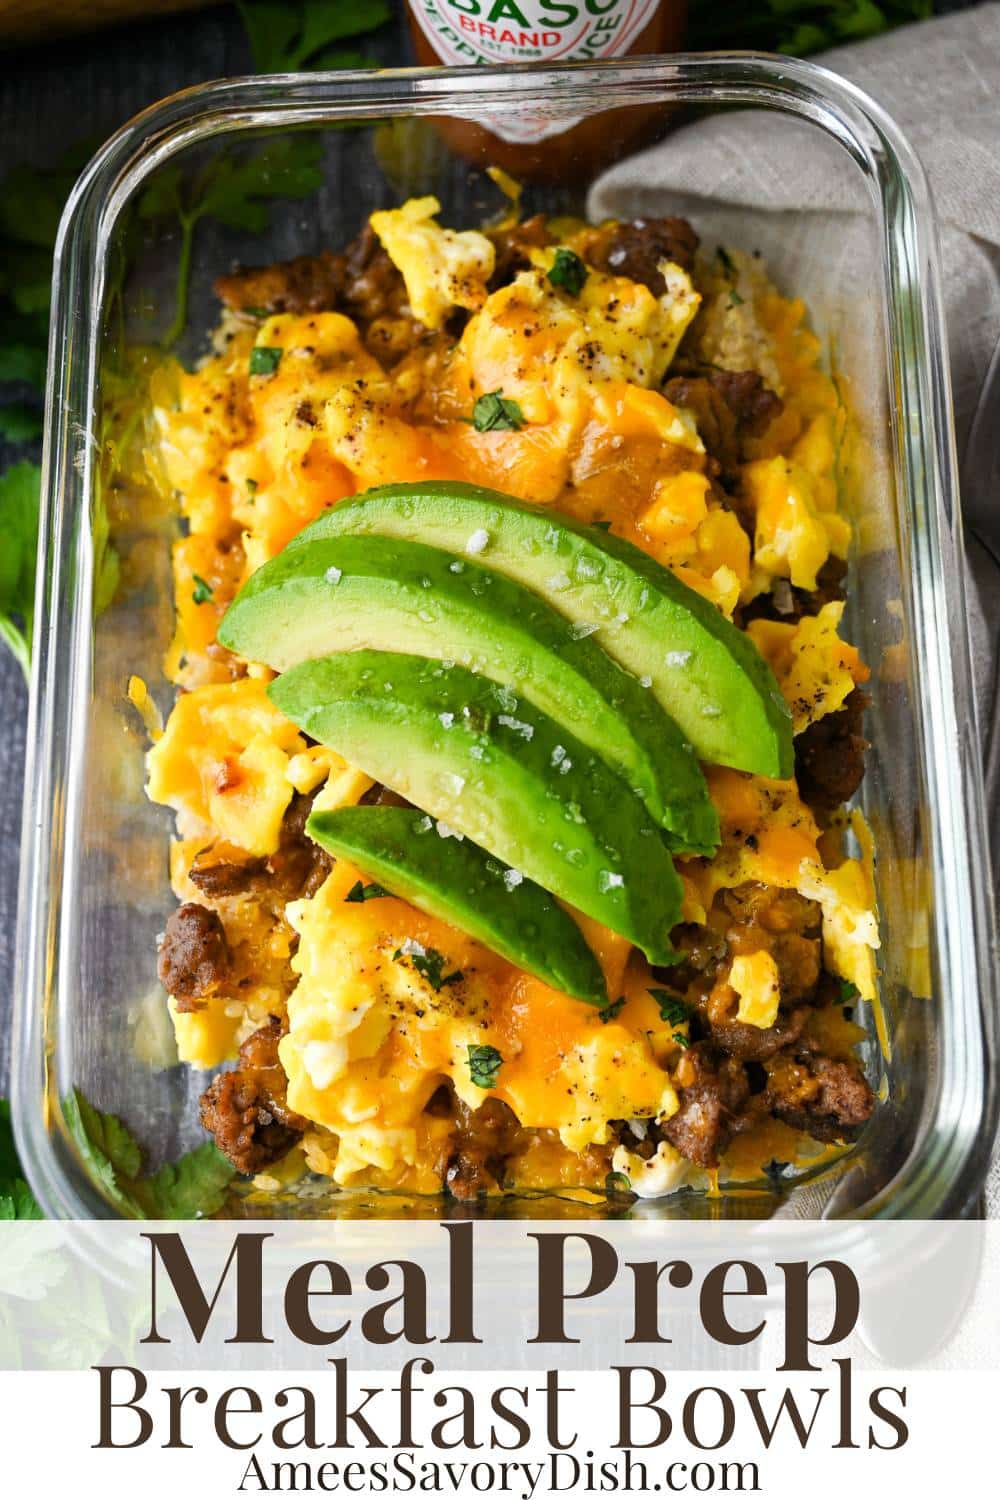 Flavorful turkey sausage, scrambled eggs, sharp cheddar, and creamy avocado atop a bed of quinoa –perfect for weekly meal prep! via @Ameessavorydish